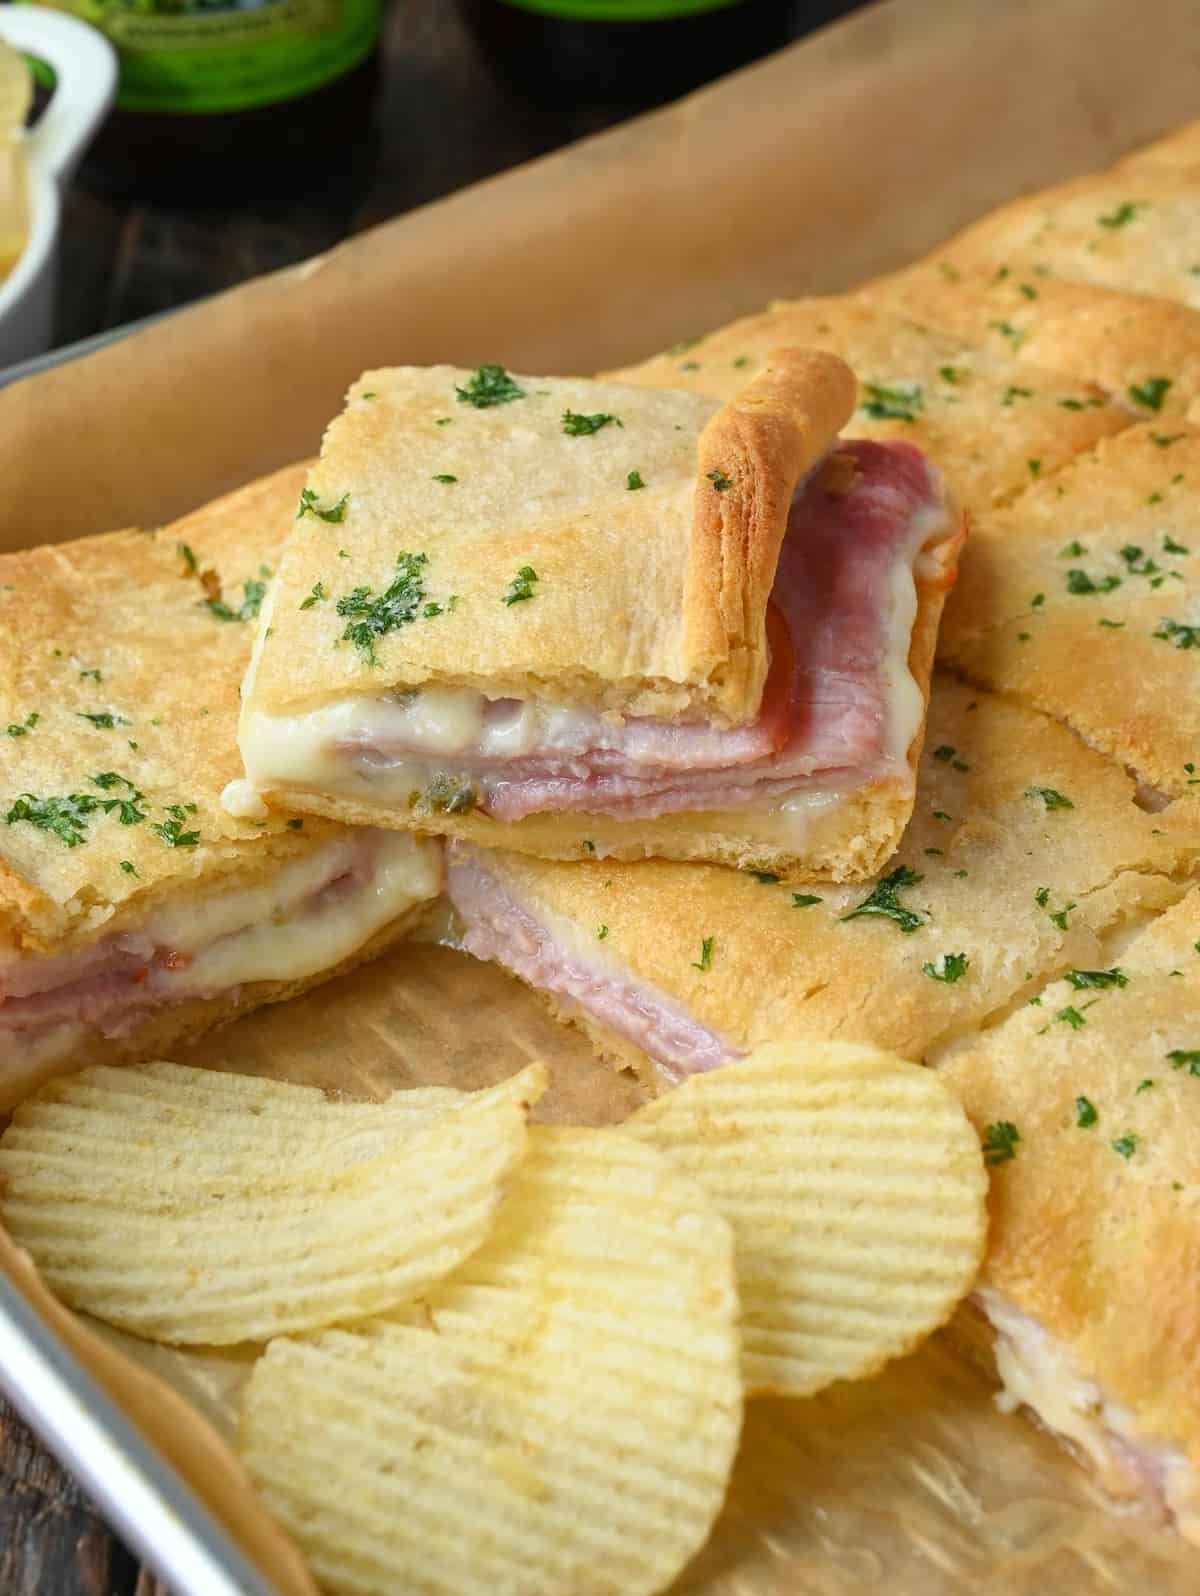 Hot ham ans cheese sandwich square placed on top of another one and some potato chips.